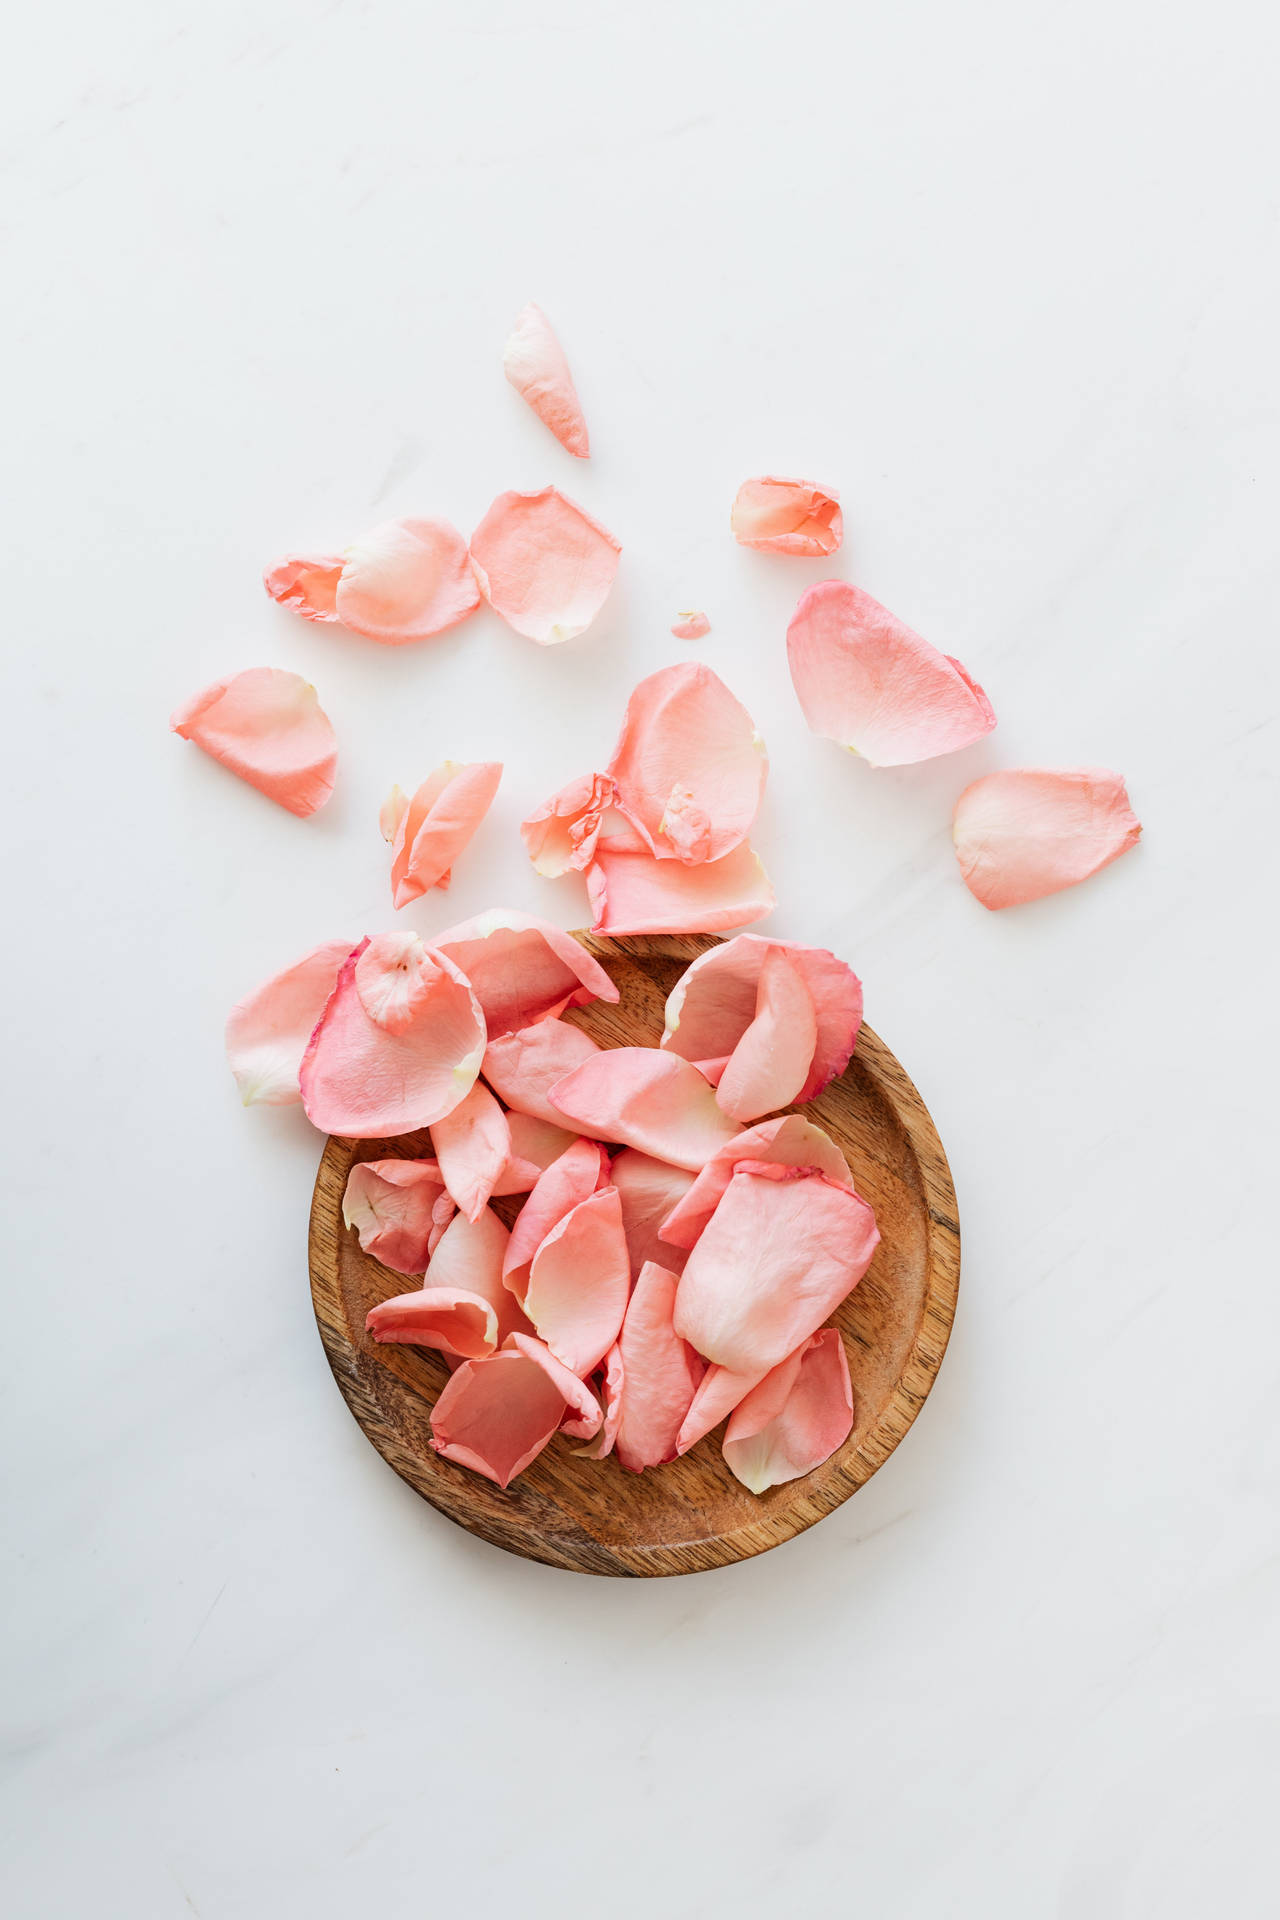 Pink Petals On White Background